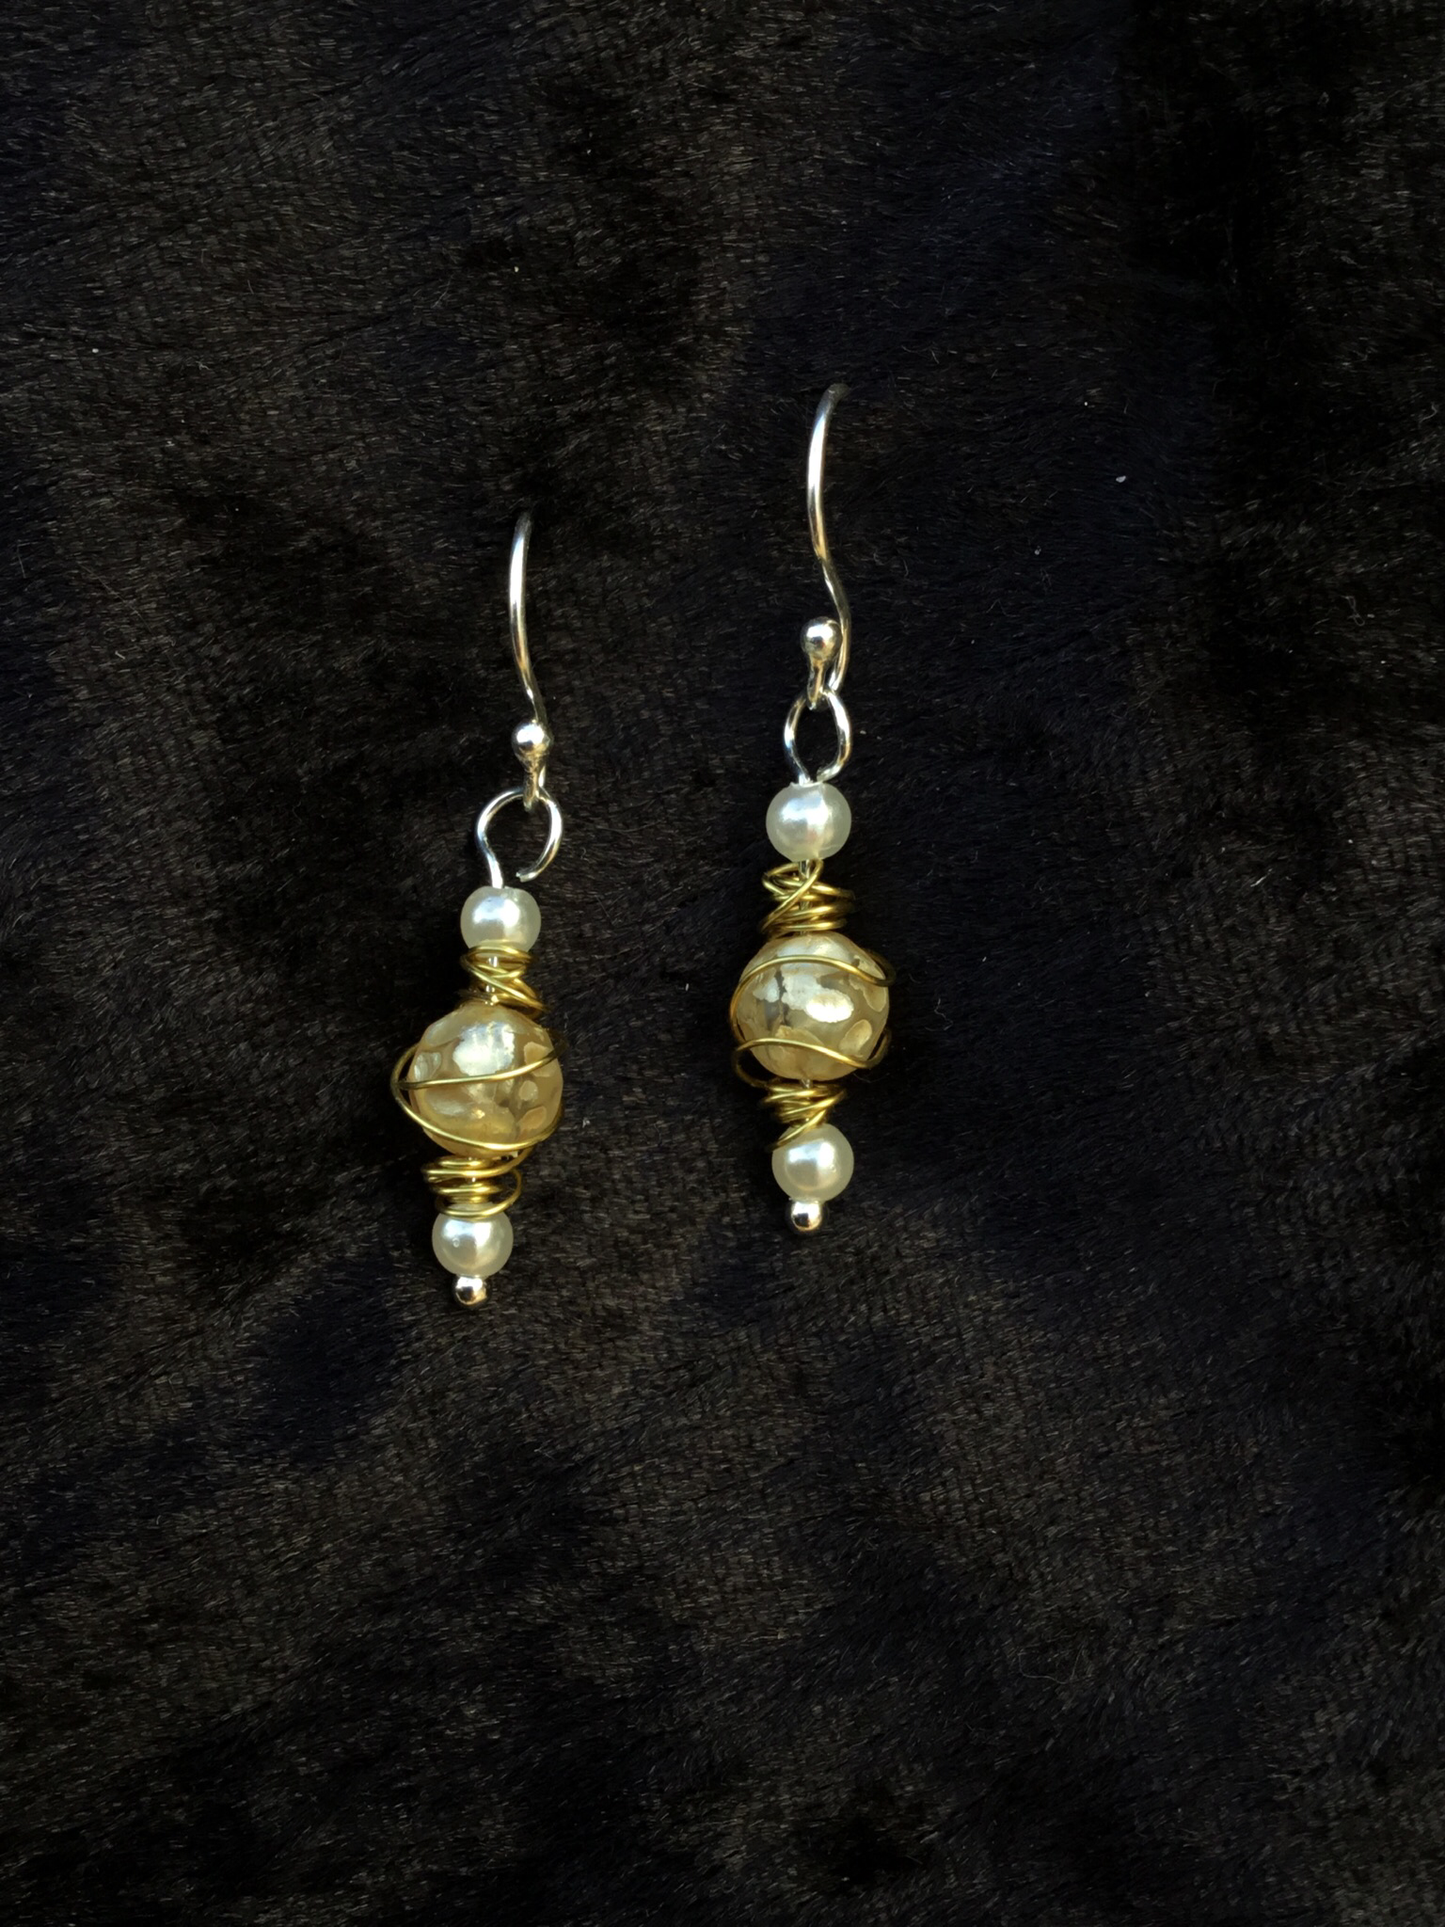 Wire with white & cream bead earrings